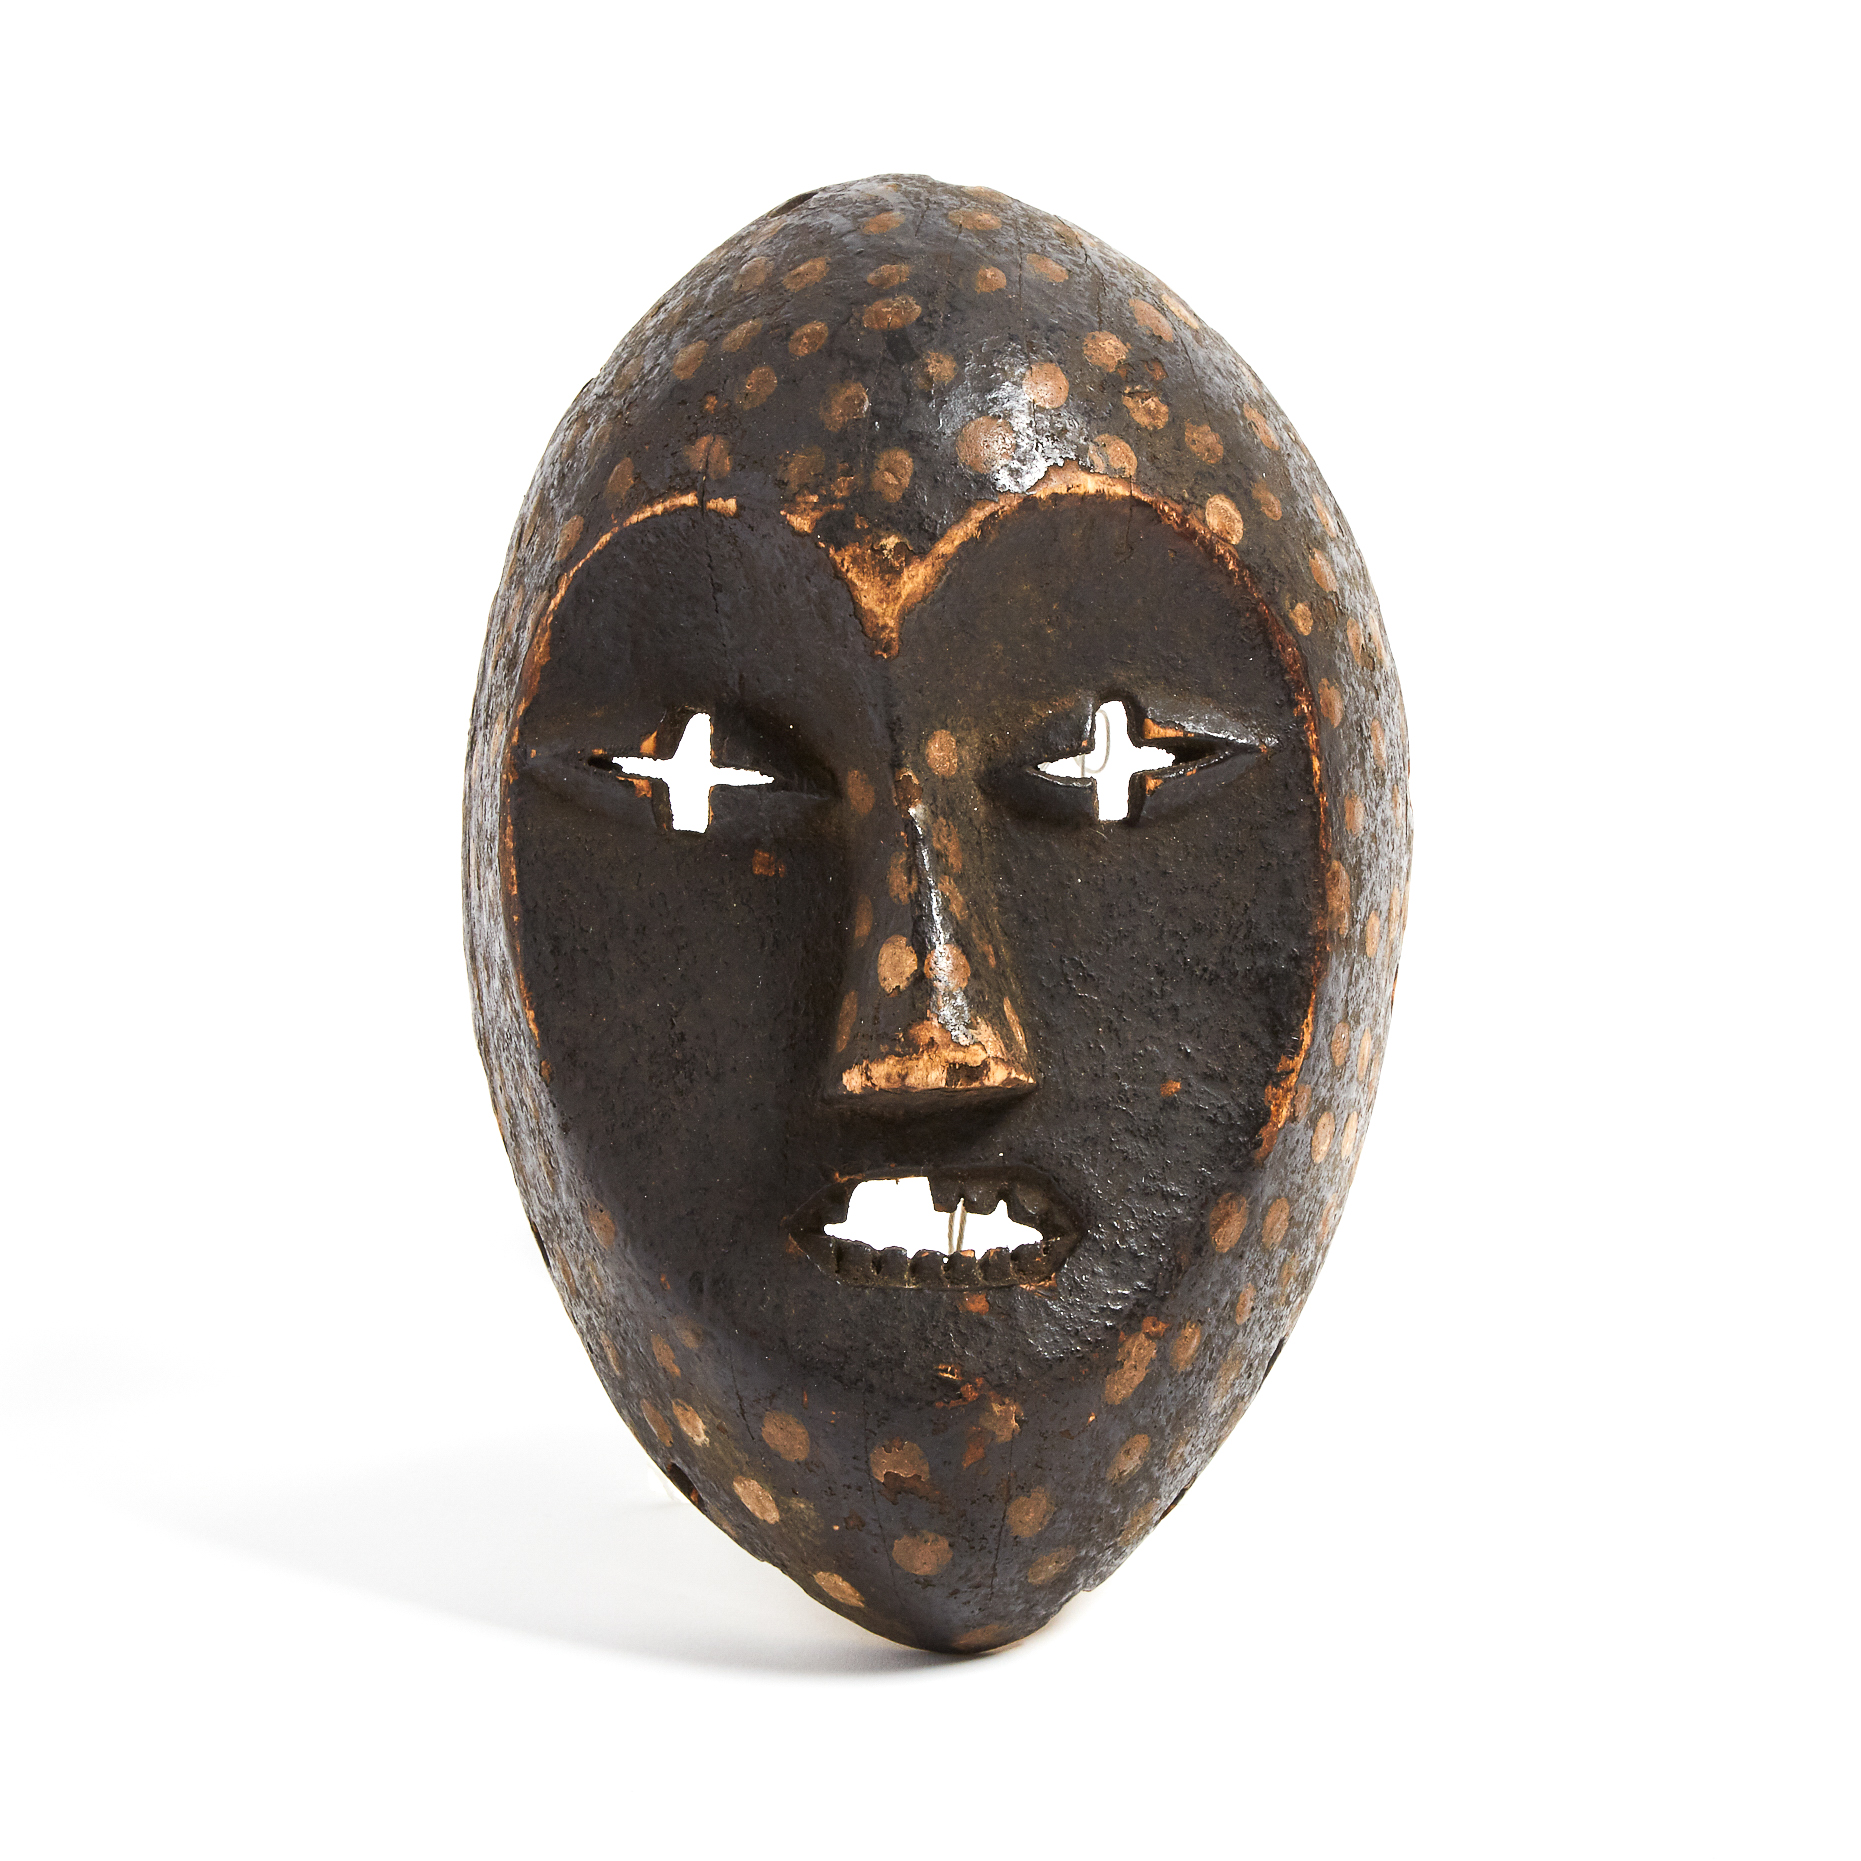 Lega Mask, Democratic Republic of Congo, Central Africa, mid to late 20th century